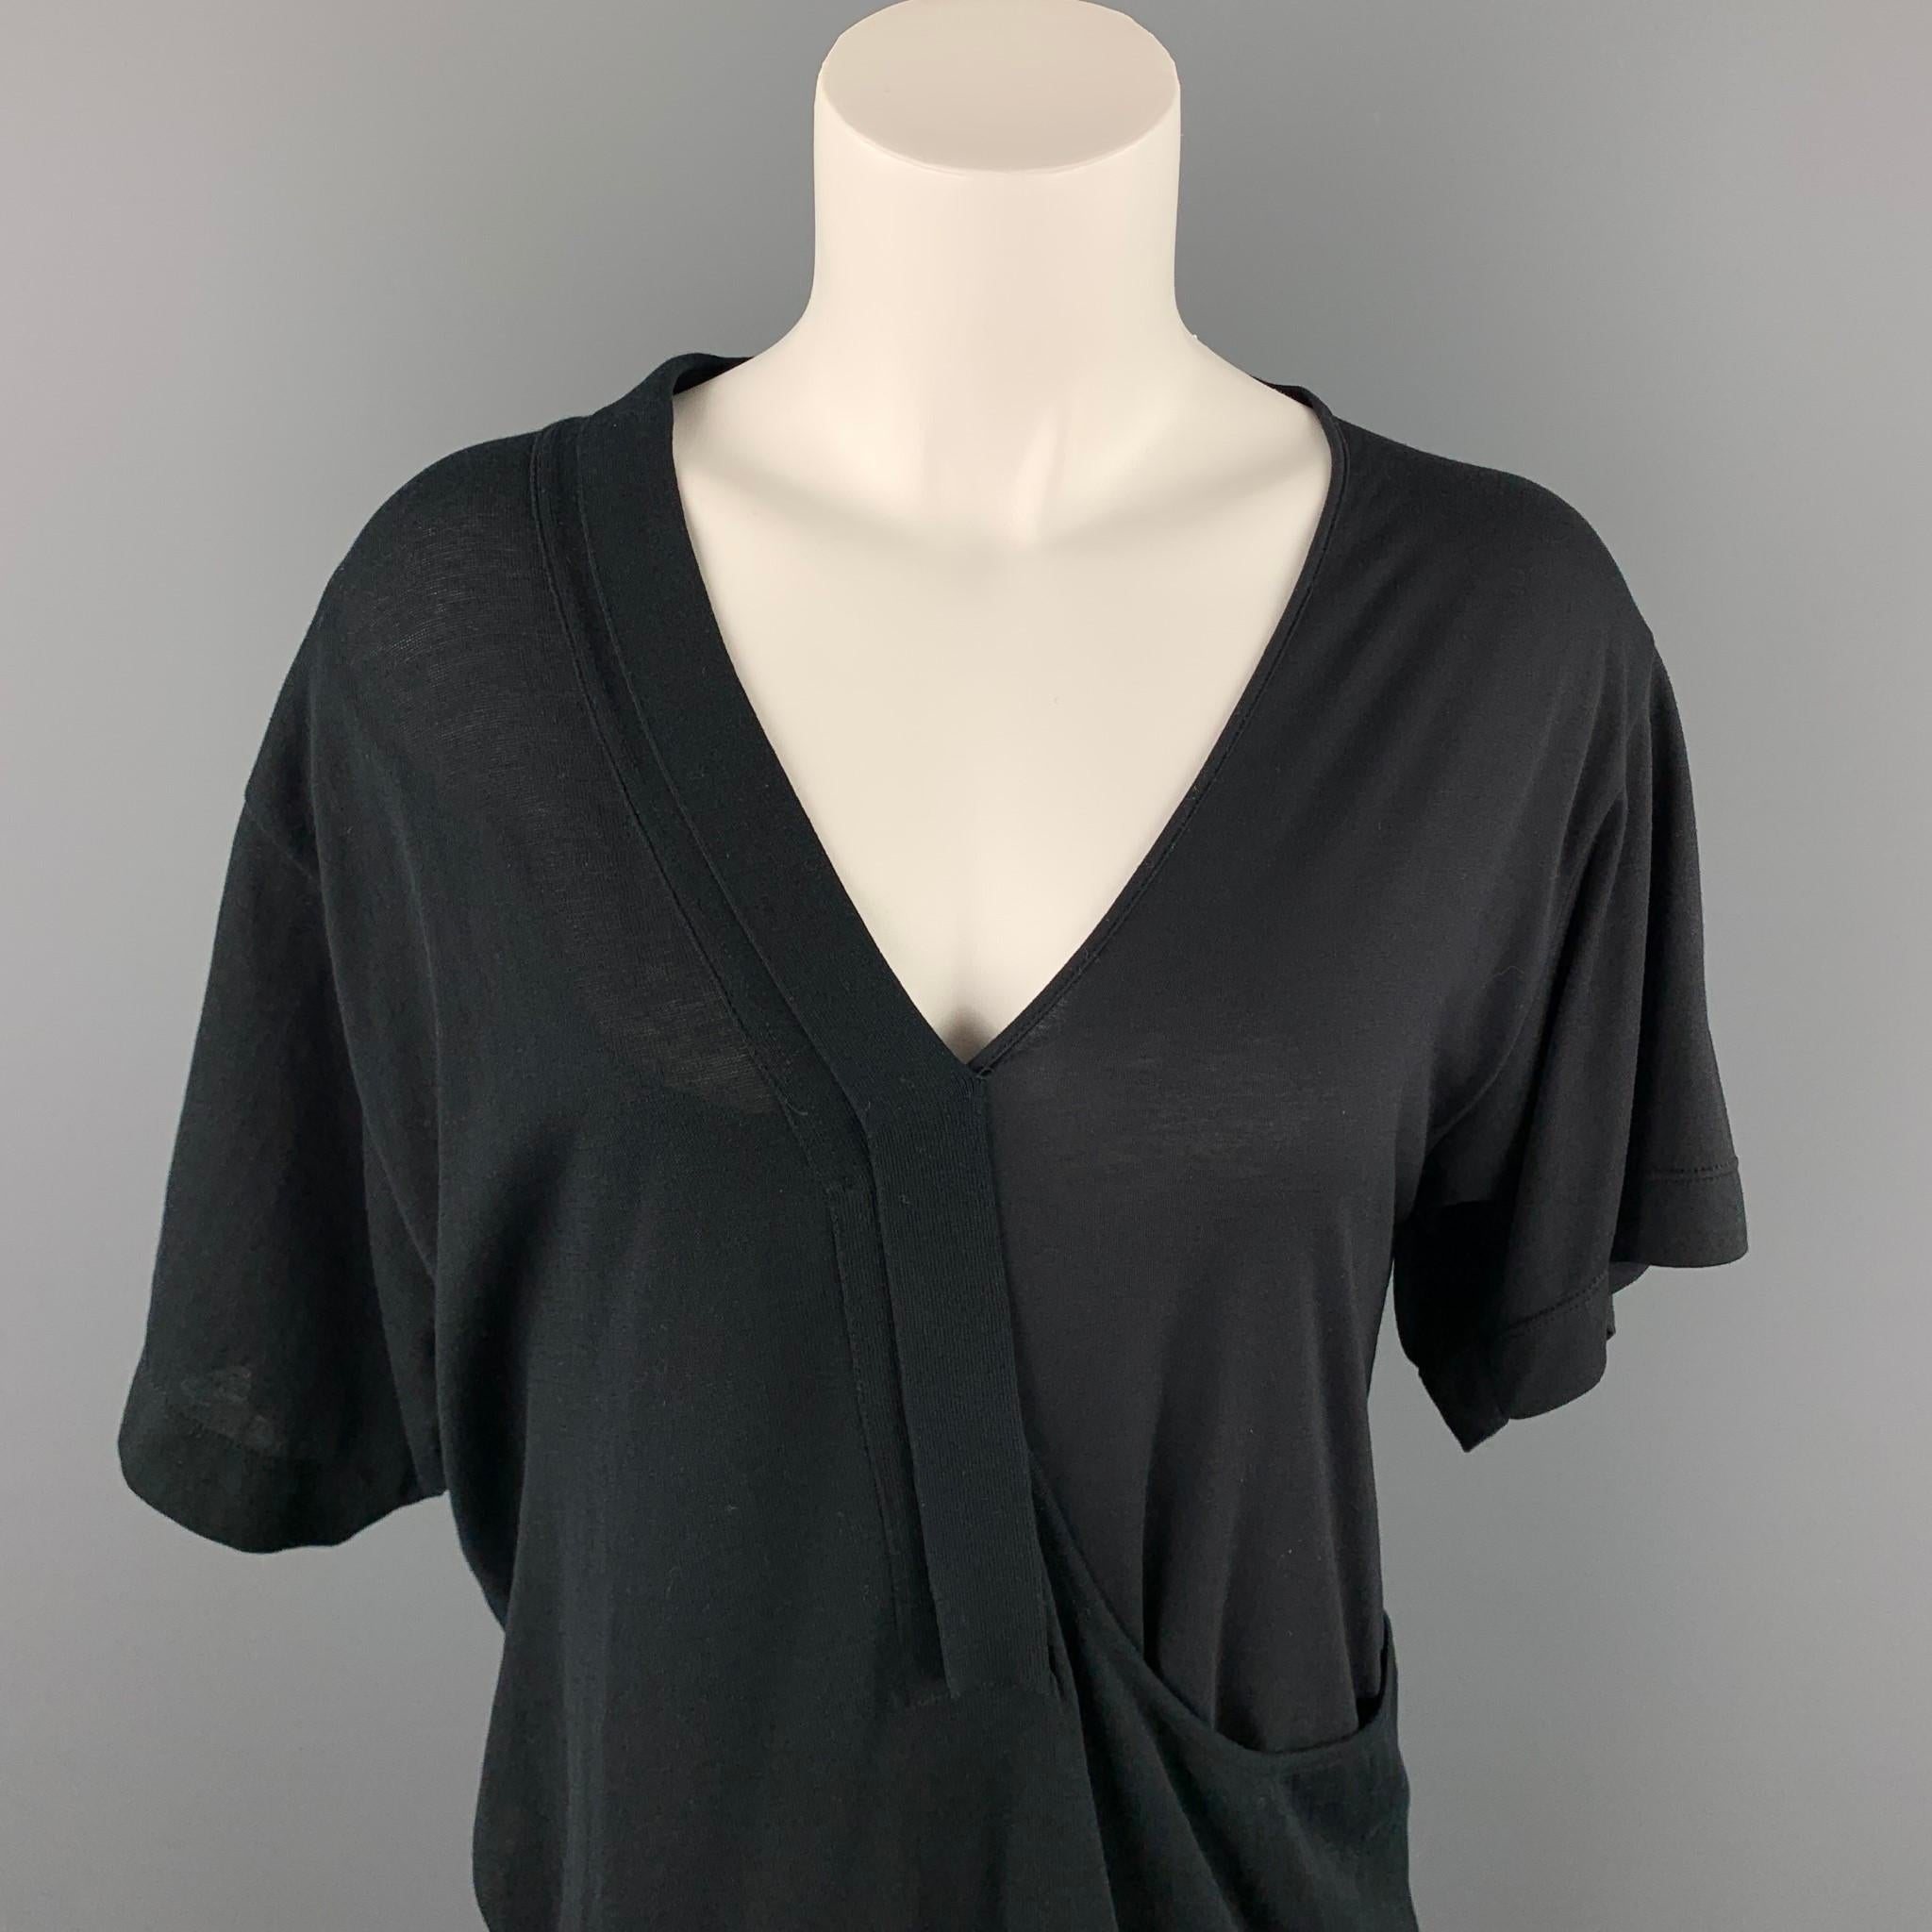 CoSTUME NATIONAL casual top comes in a black mixed fabric featuring a loose fit, layered style, and a v-neck.

Very Good Pre-Owned Condition.
Marked: S

Measurements:

Shoulder: 9 in. 
Bust: 40 in. 
Sleeve: 9 in. 
Length: 29.5 in. 

SKU: